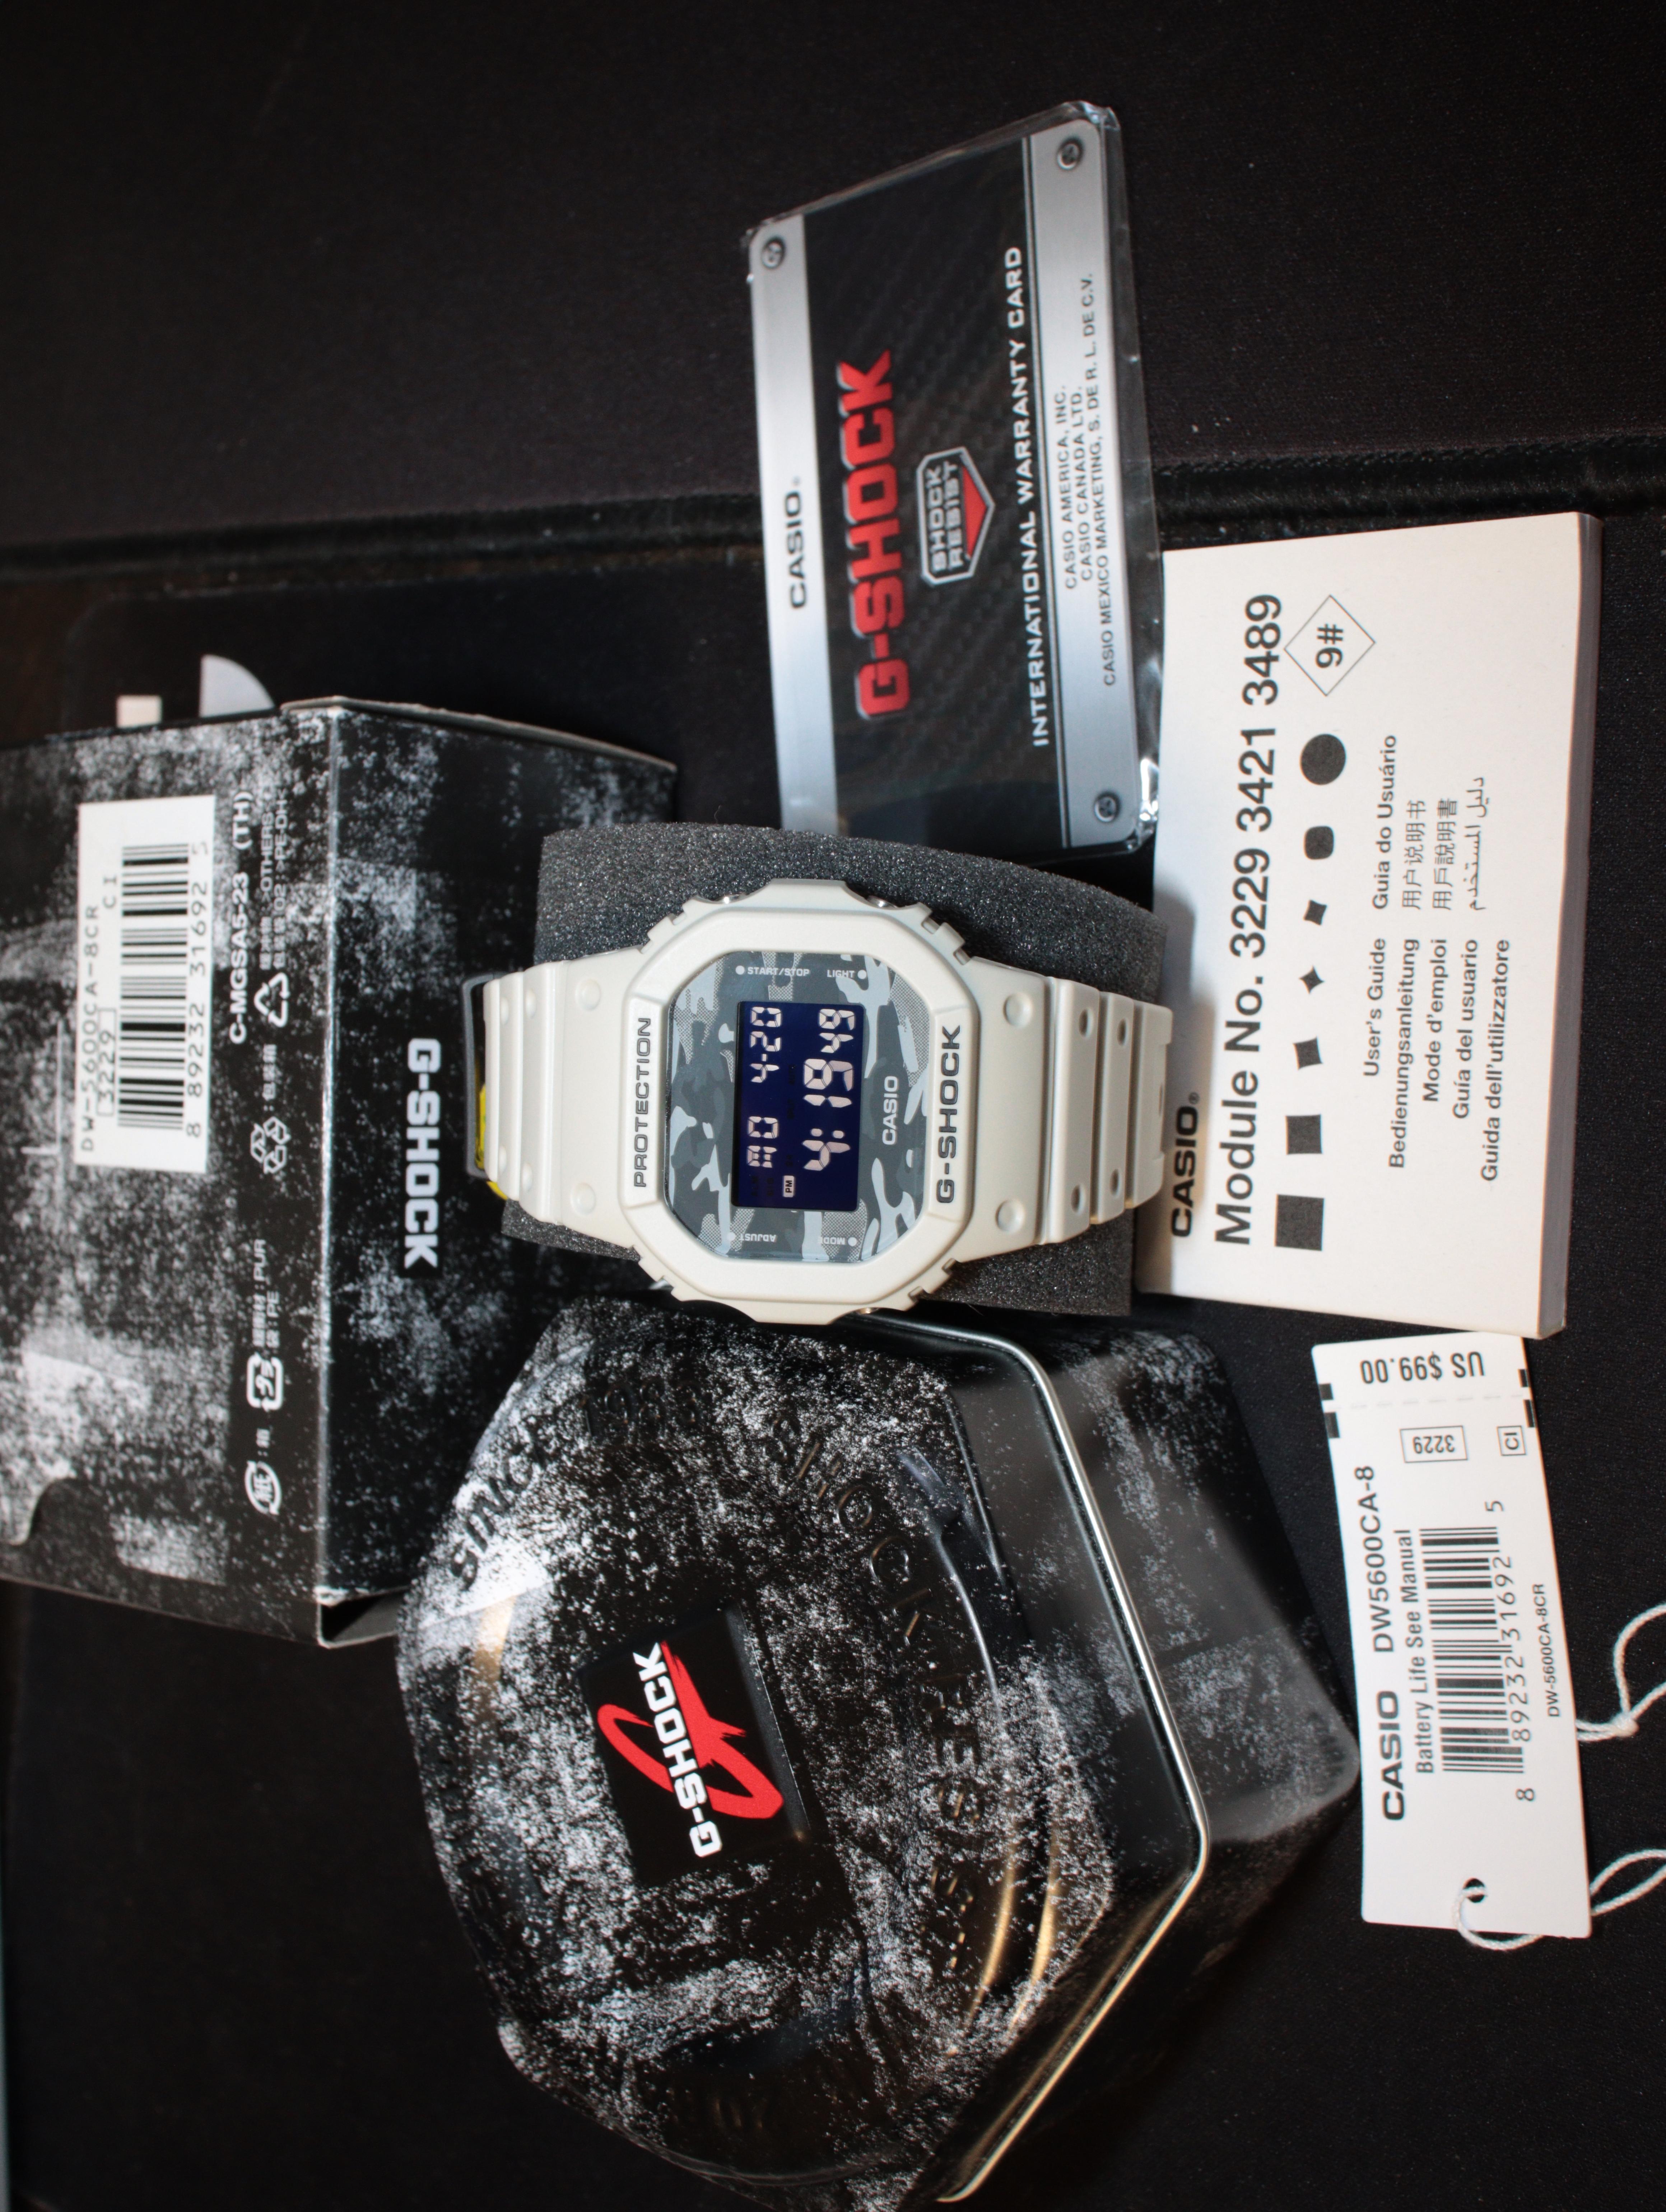 WTS] Casio G-Shock | price reduced DW5600CA-8 WatchCharts Marketplace